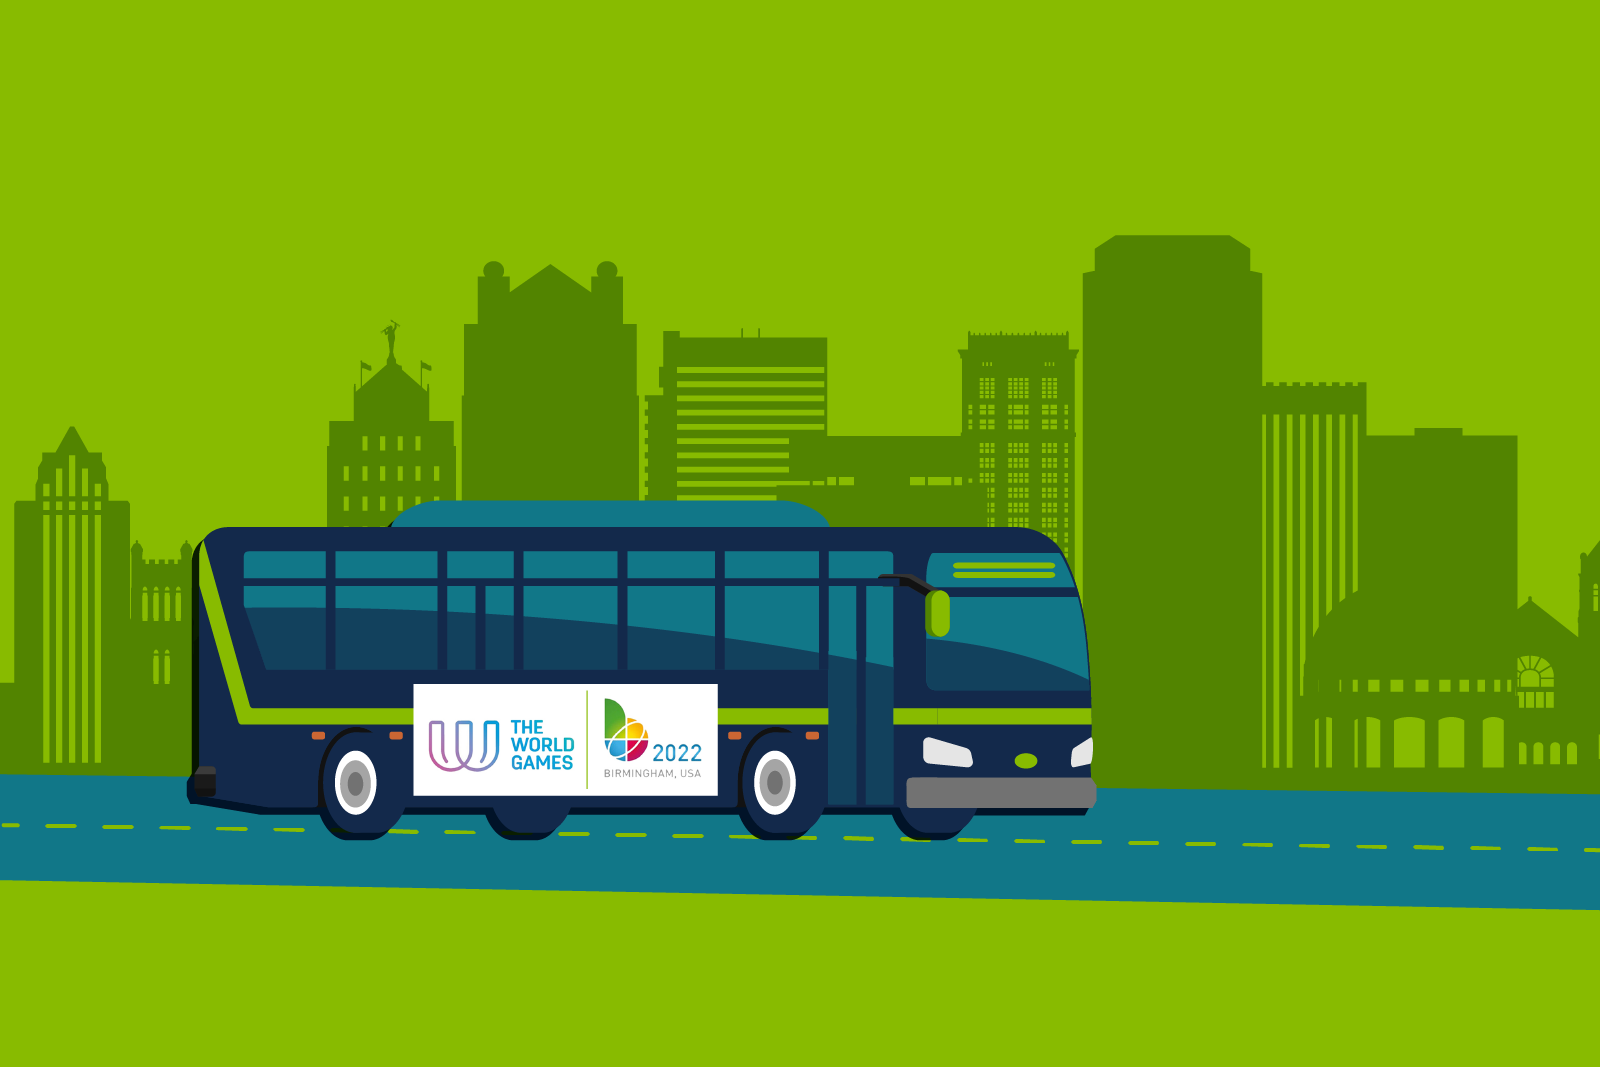 Illustration of a shuttle bus with The World games logo...